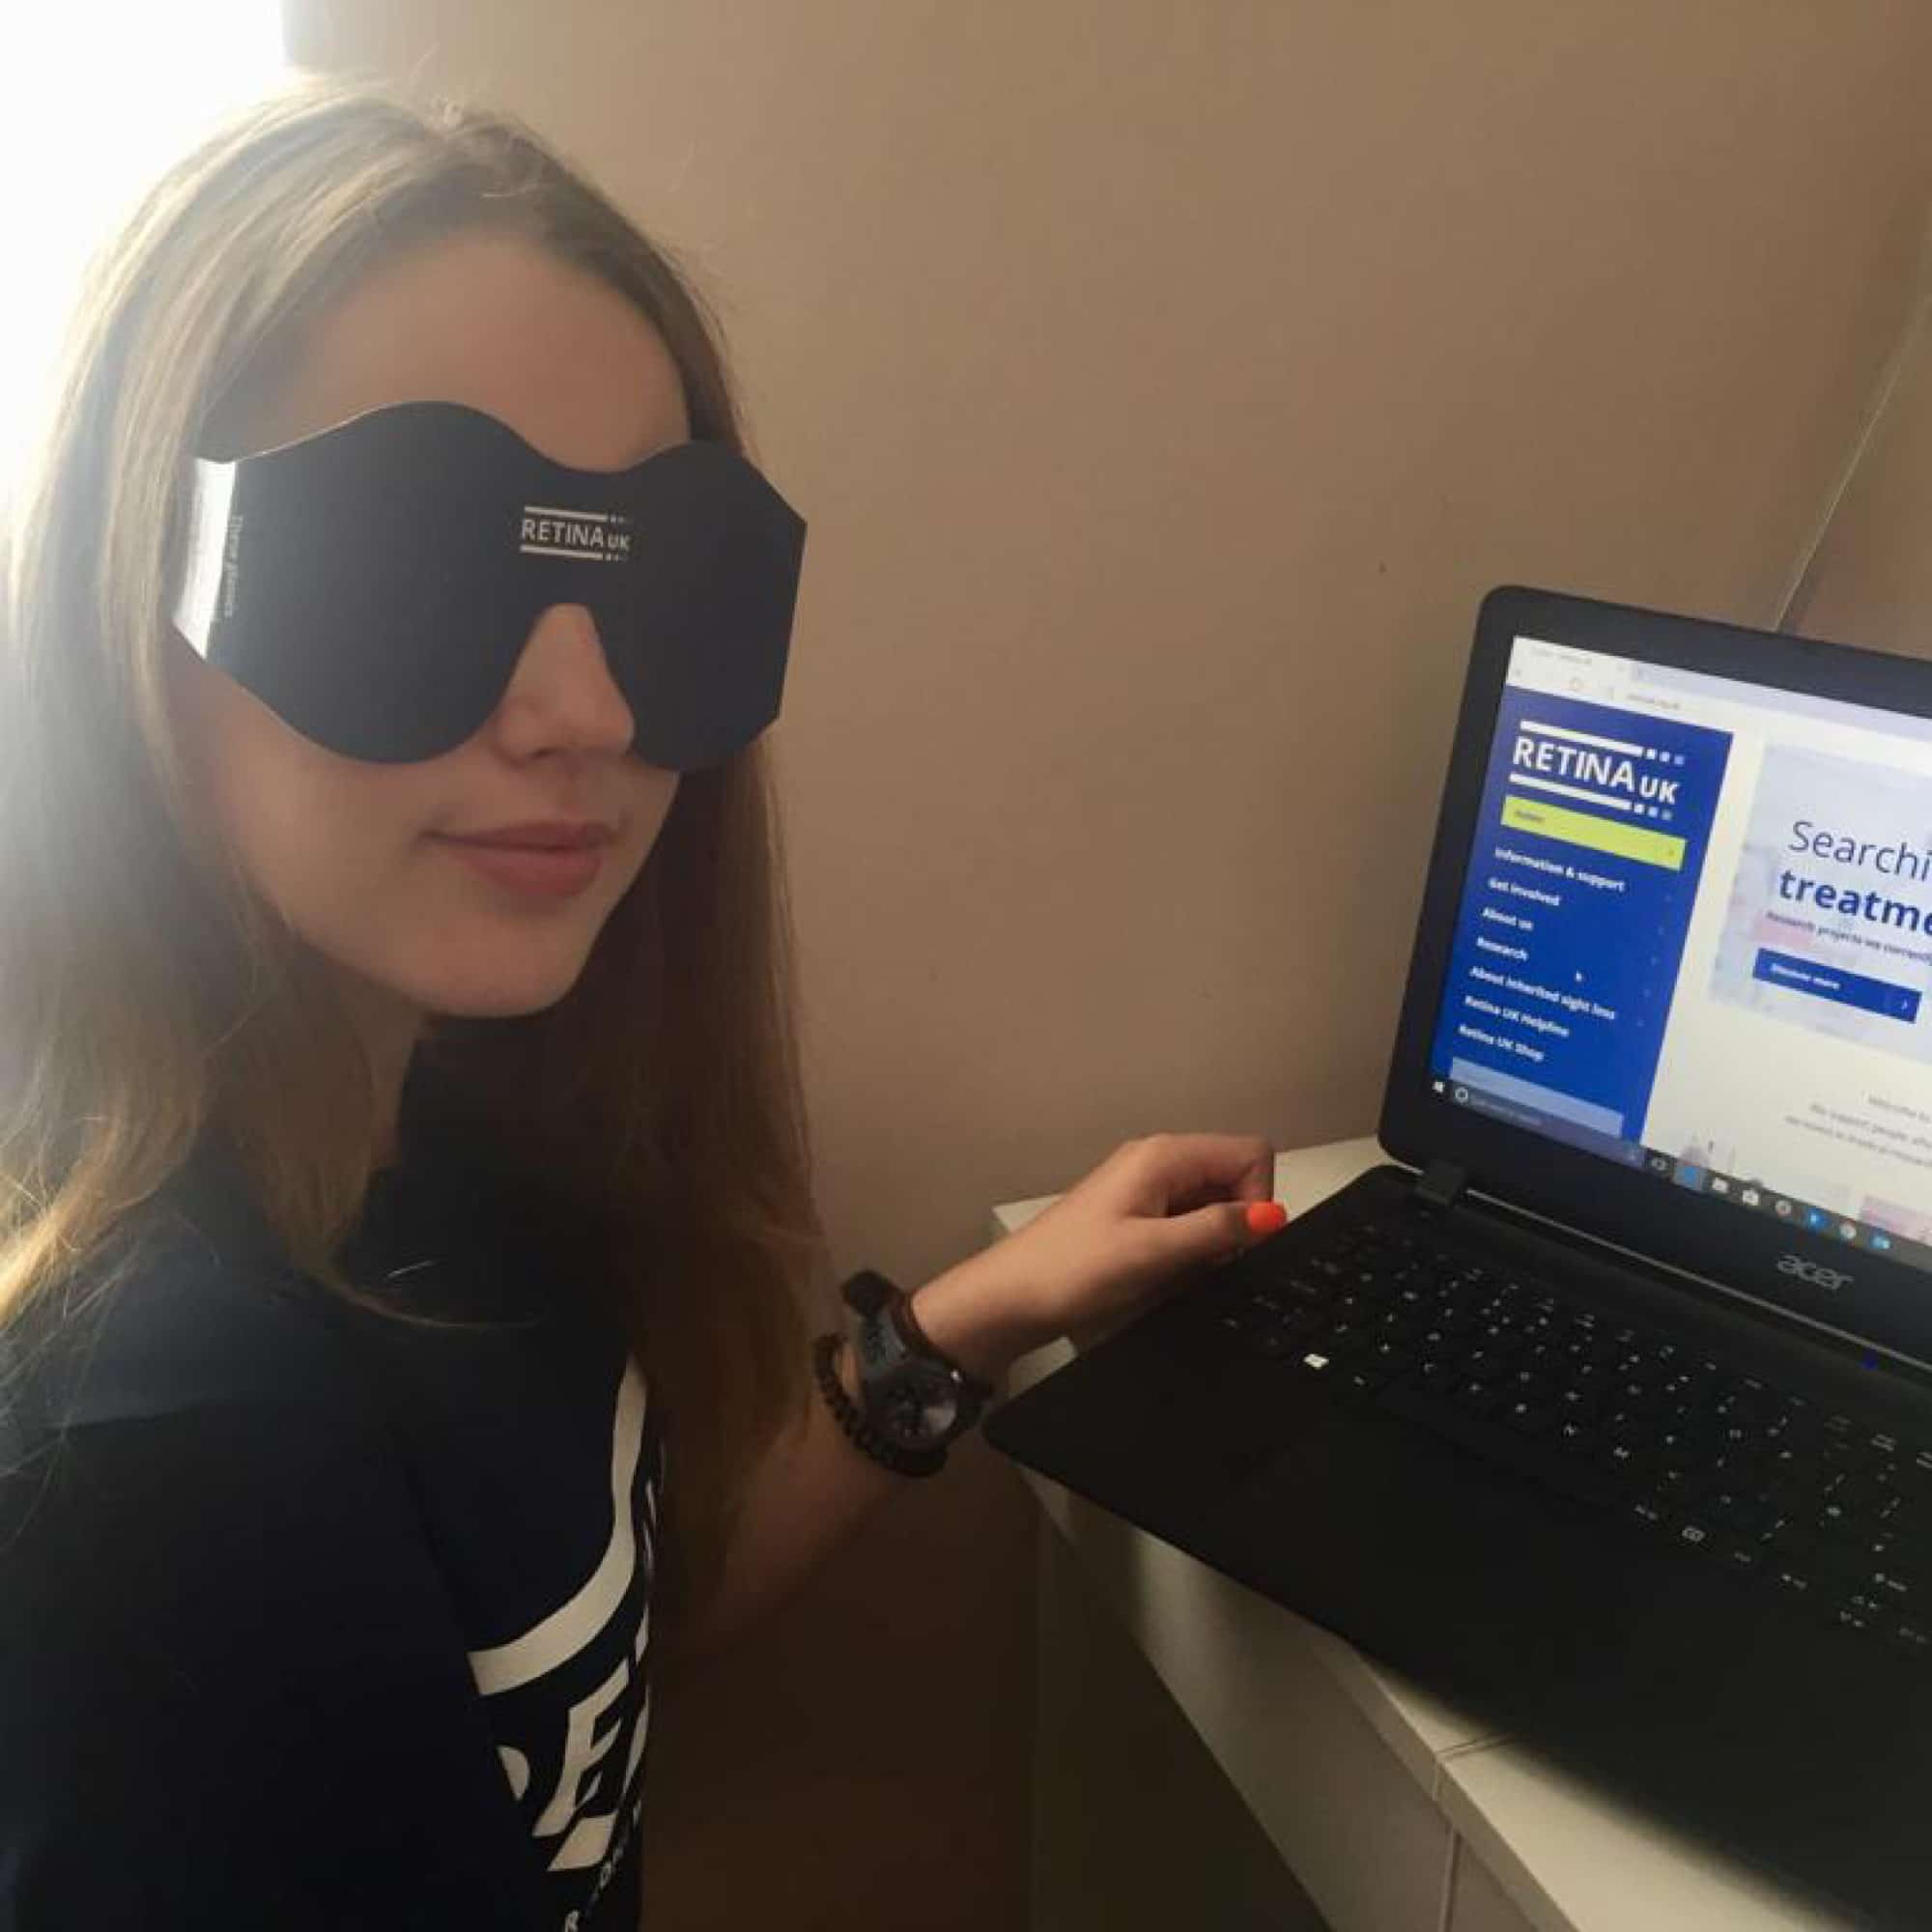 A girl wearing SIM Specs sitting in front of a laptop